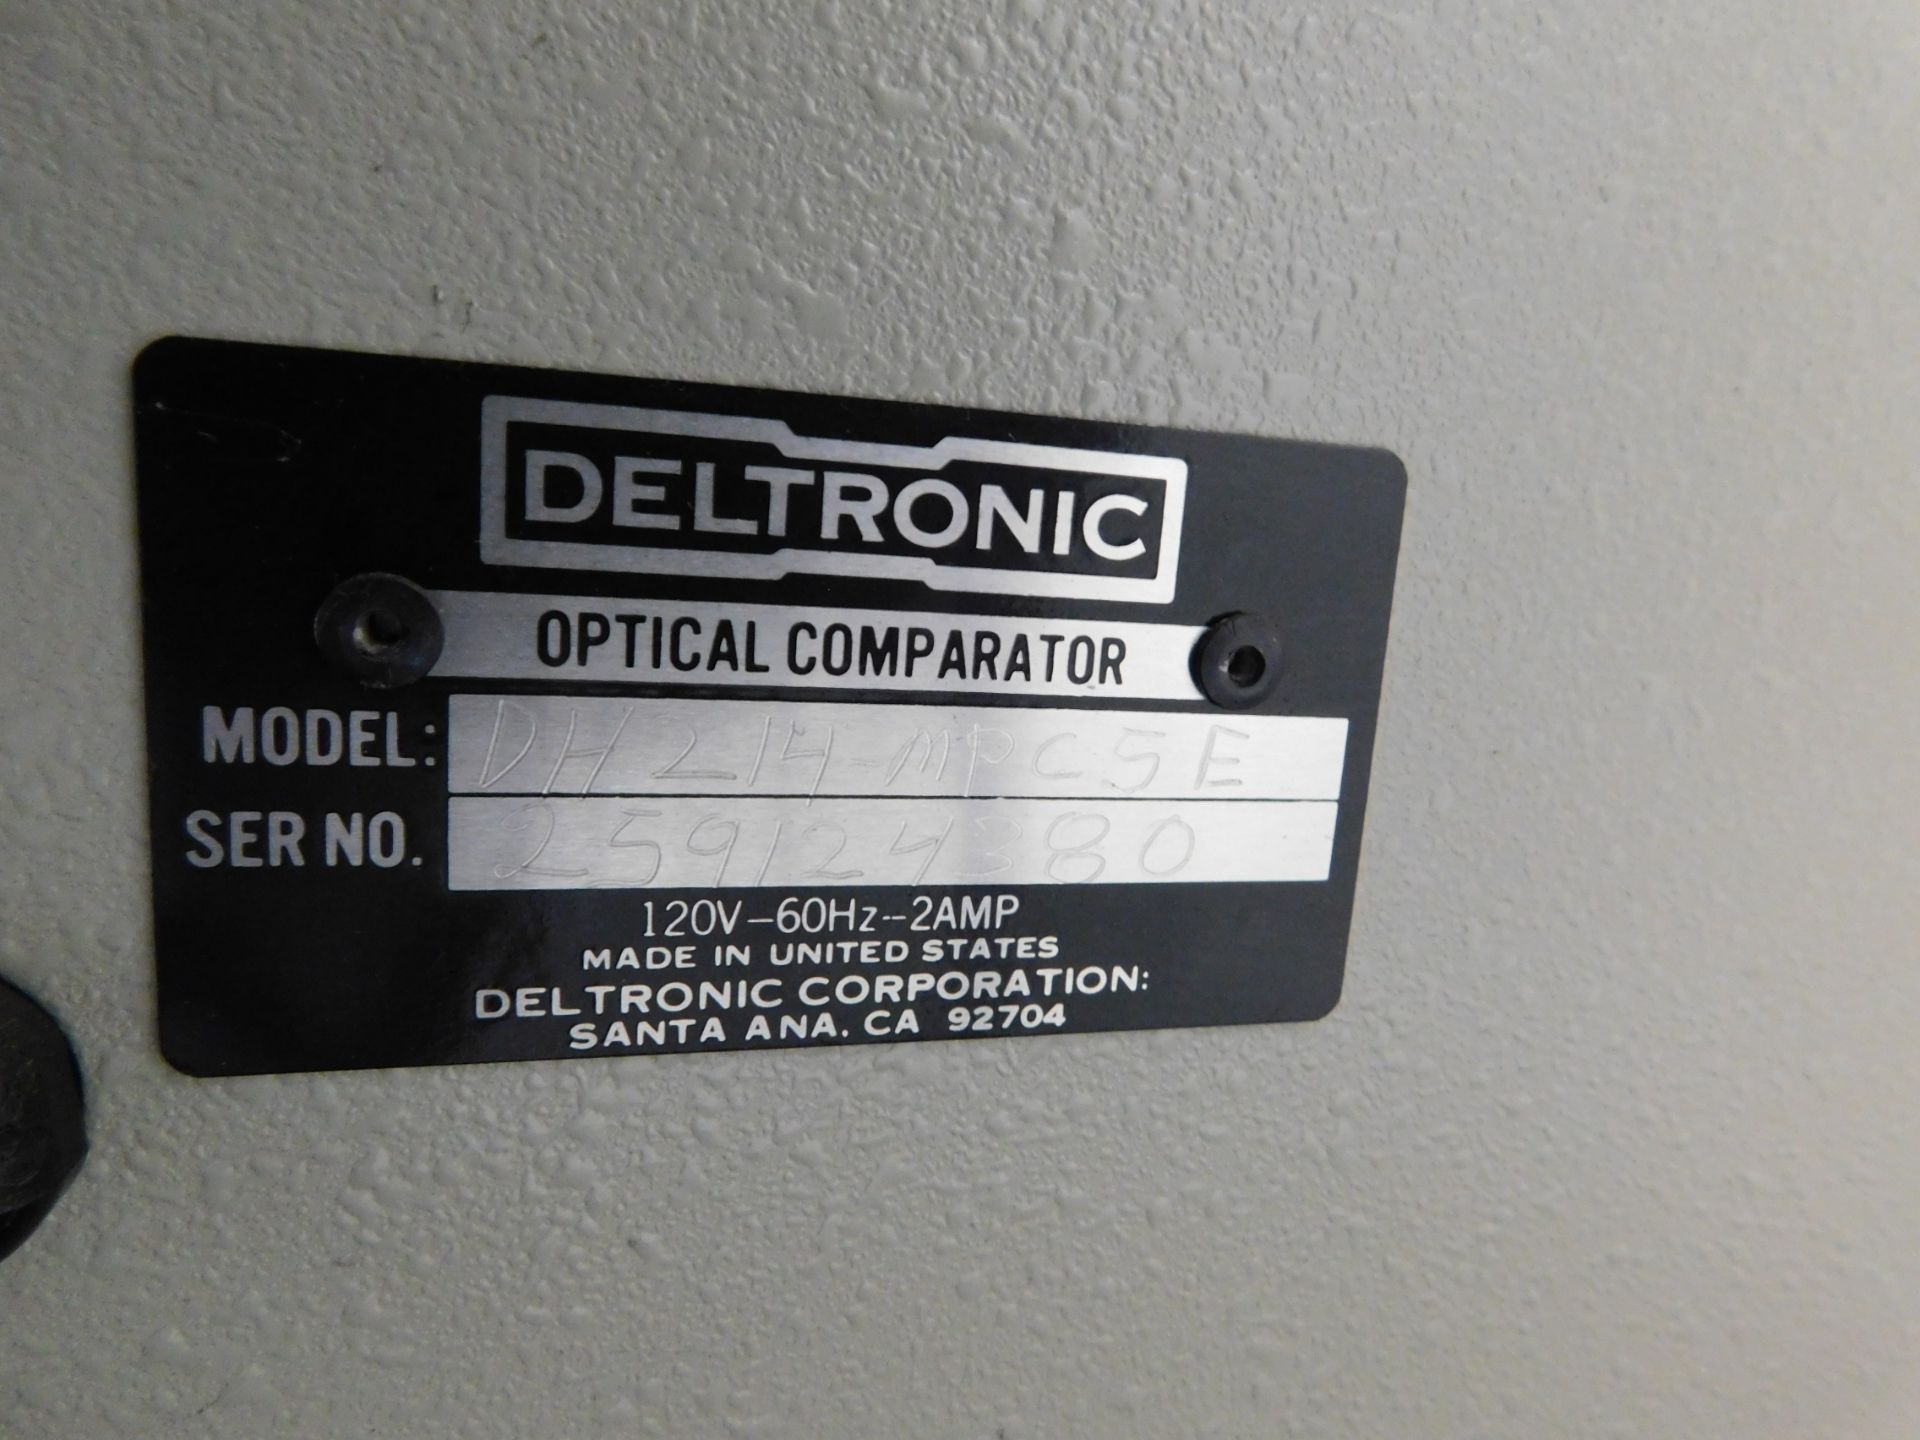 Deltronic Model DH-214 Optical Comparator sn# 259124380,14", Deltronic MPC-5 Processor - Image 8 of 8